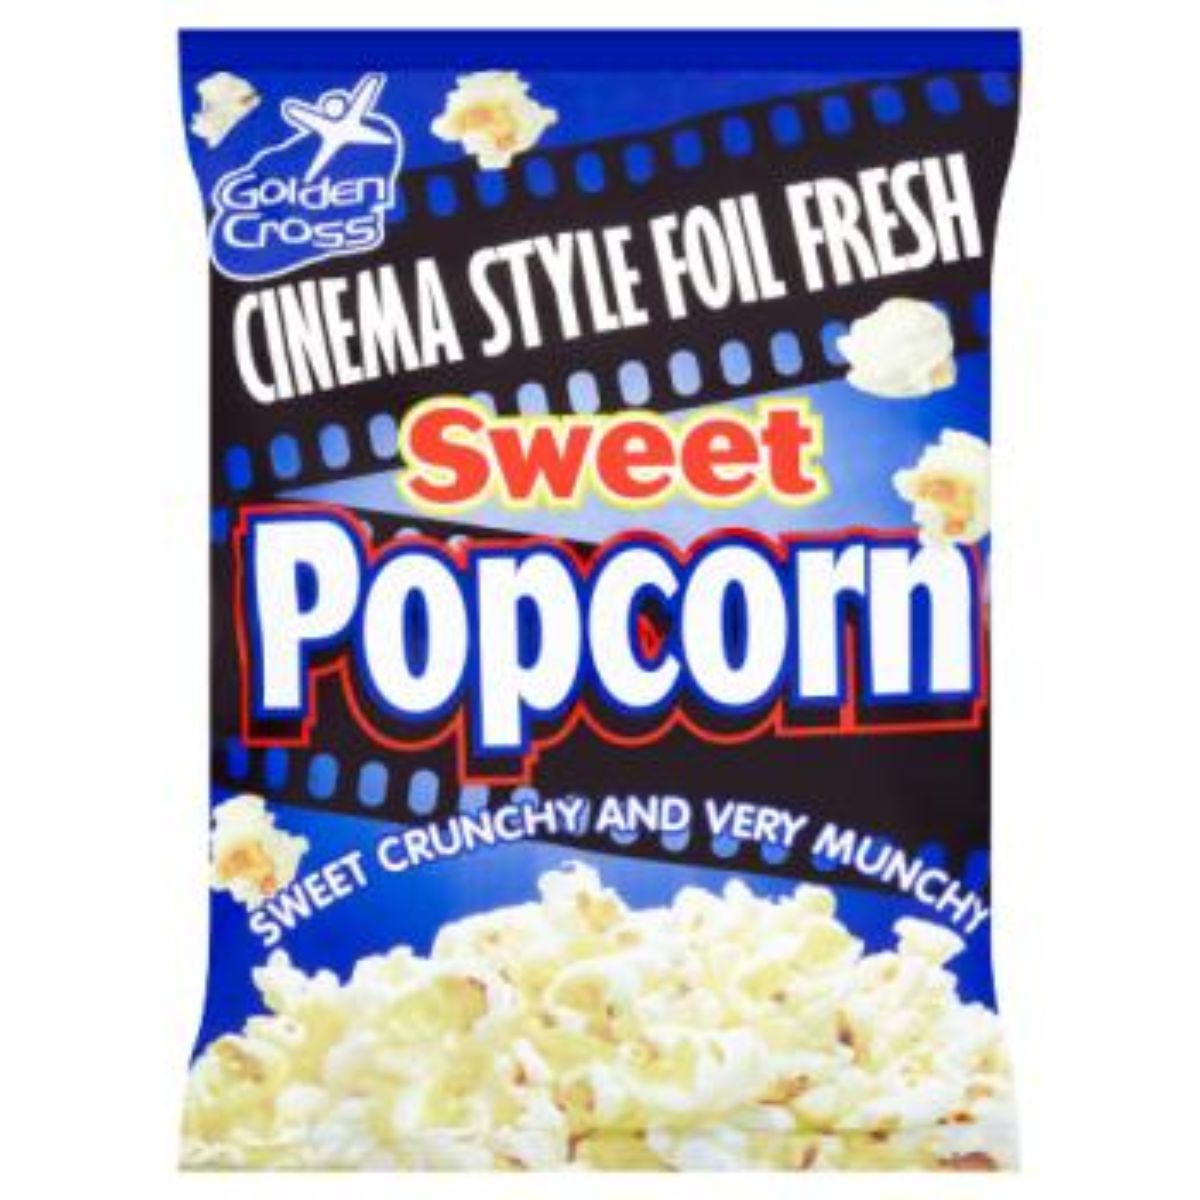 A bag of Golden Cross - Sweet Popcorn - 150g on a white background.